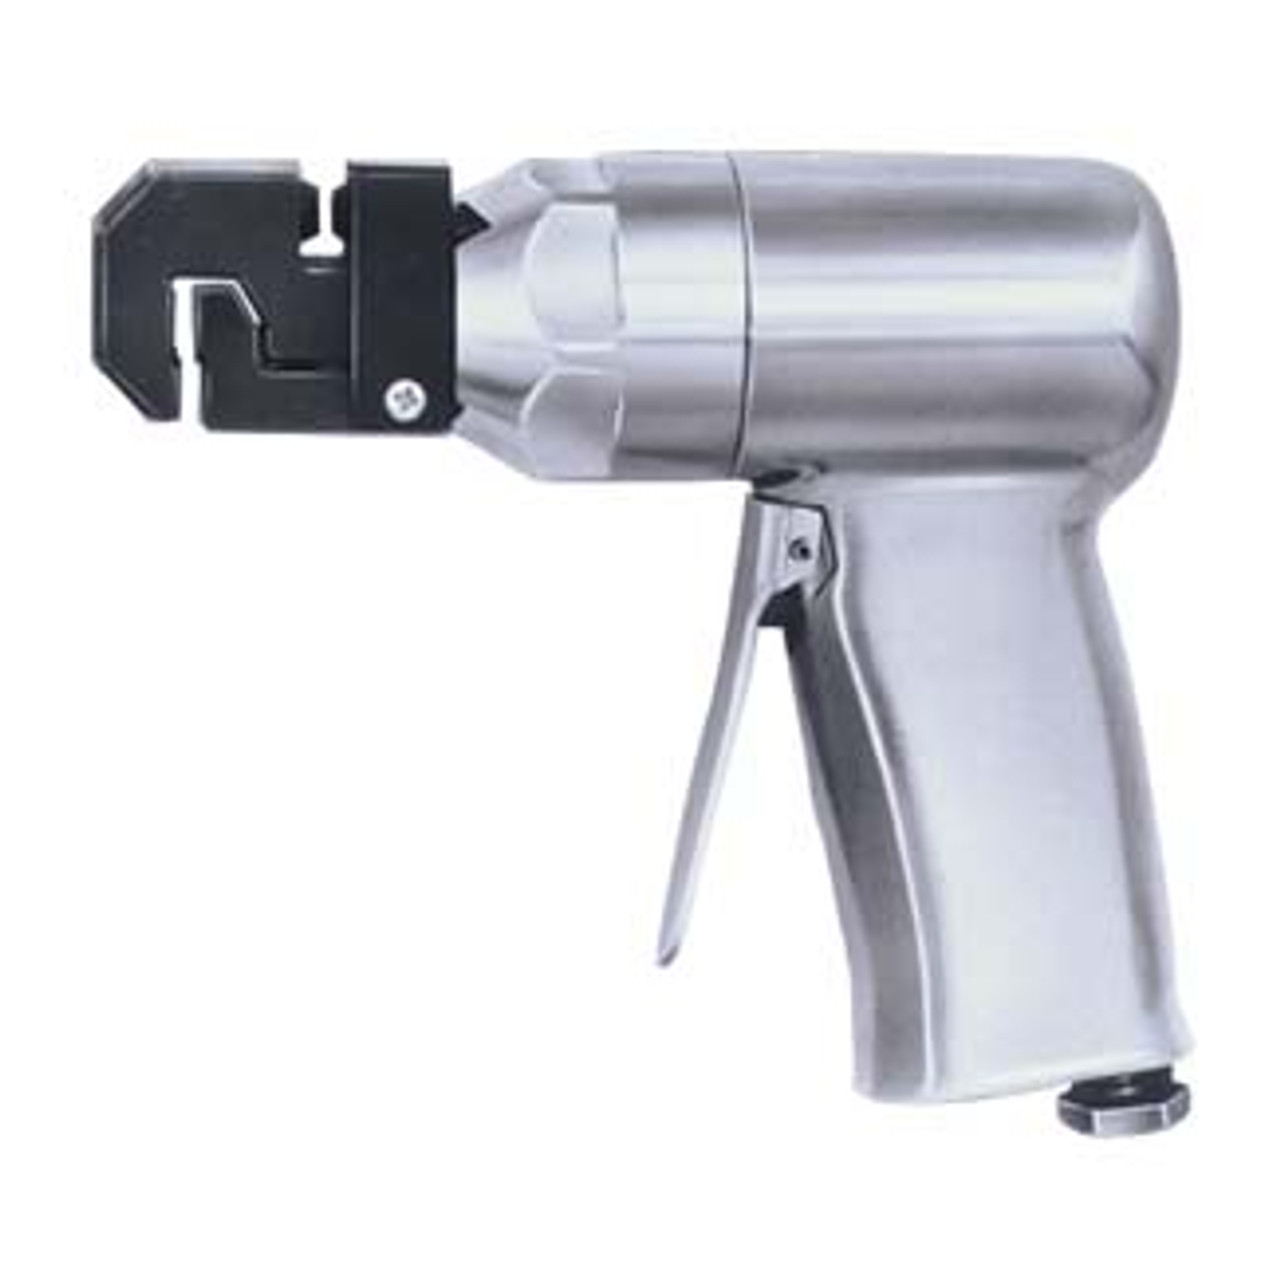 Pistol Grip Punch/ Flange Tool with 5.5mm Punch